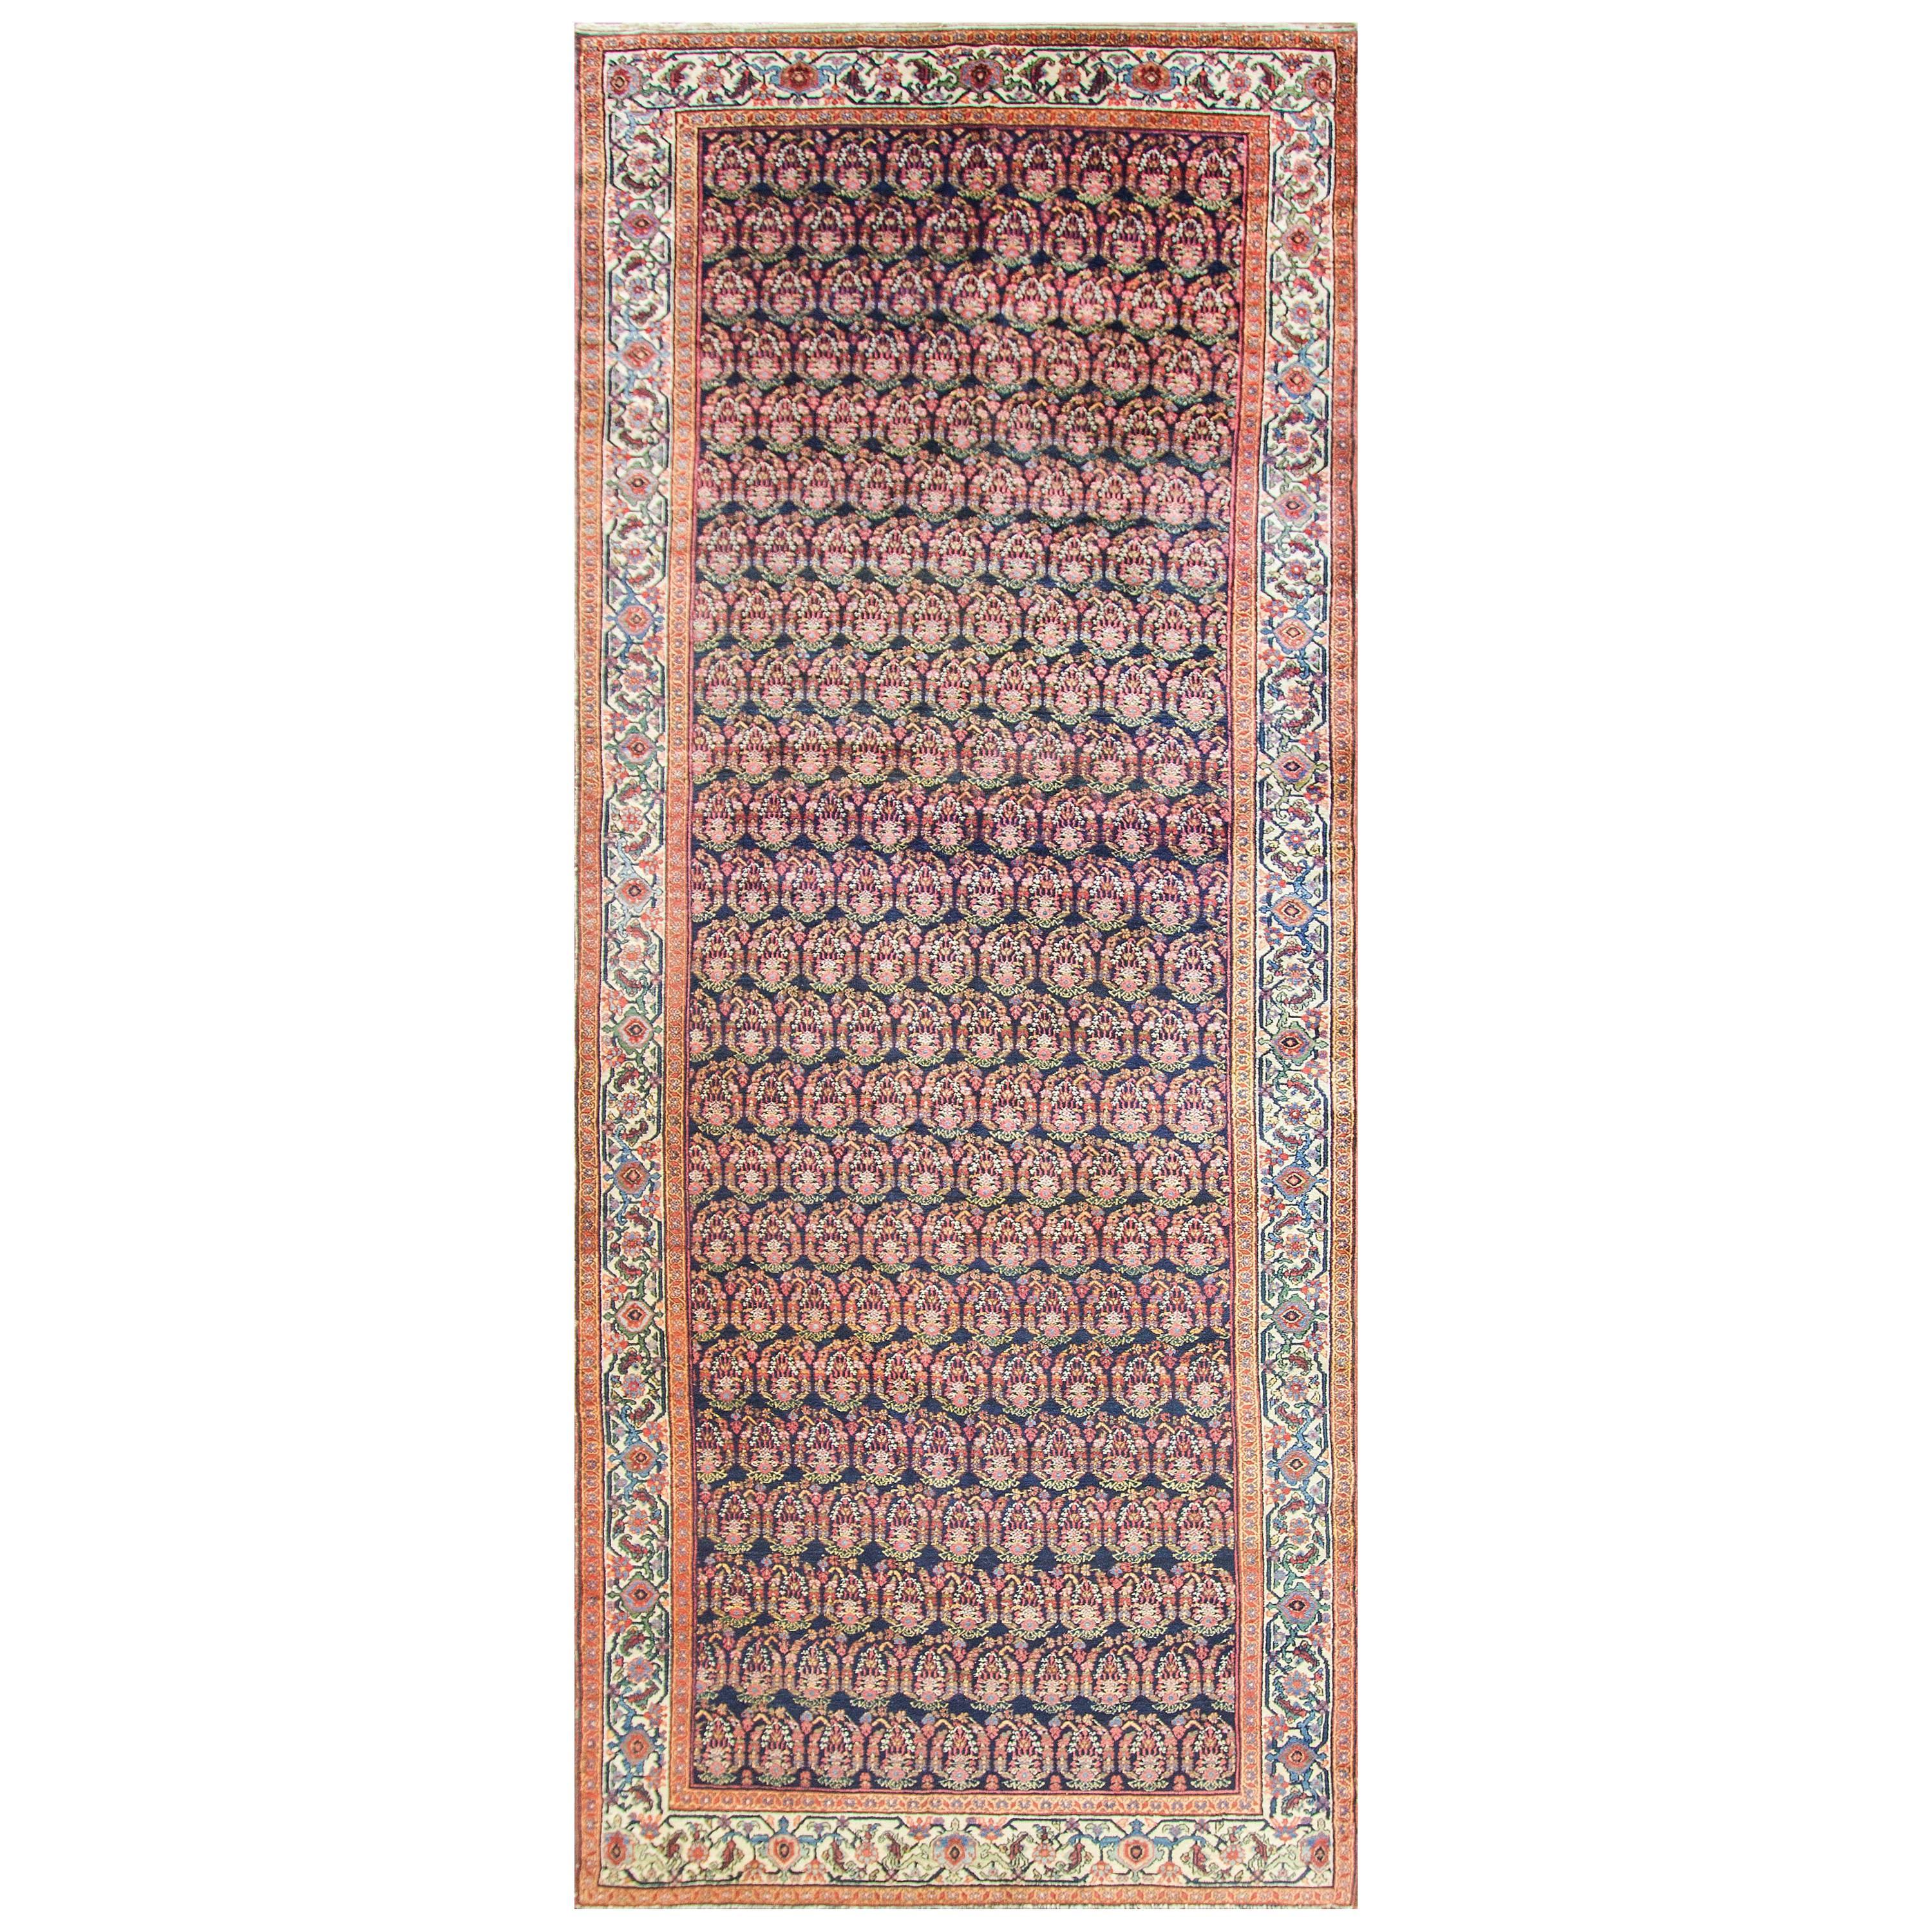  Antique Persian Senneh Malayer Carpet, Gallery/Runner Size For Sale